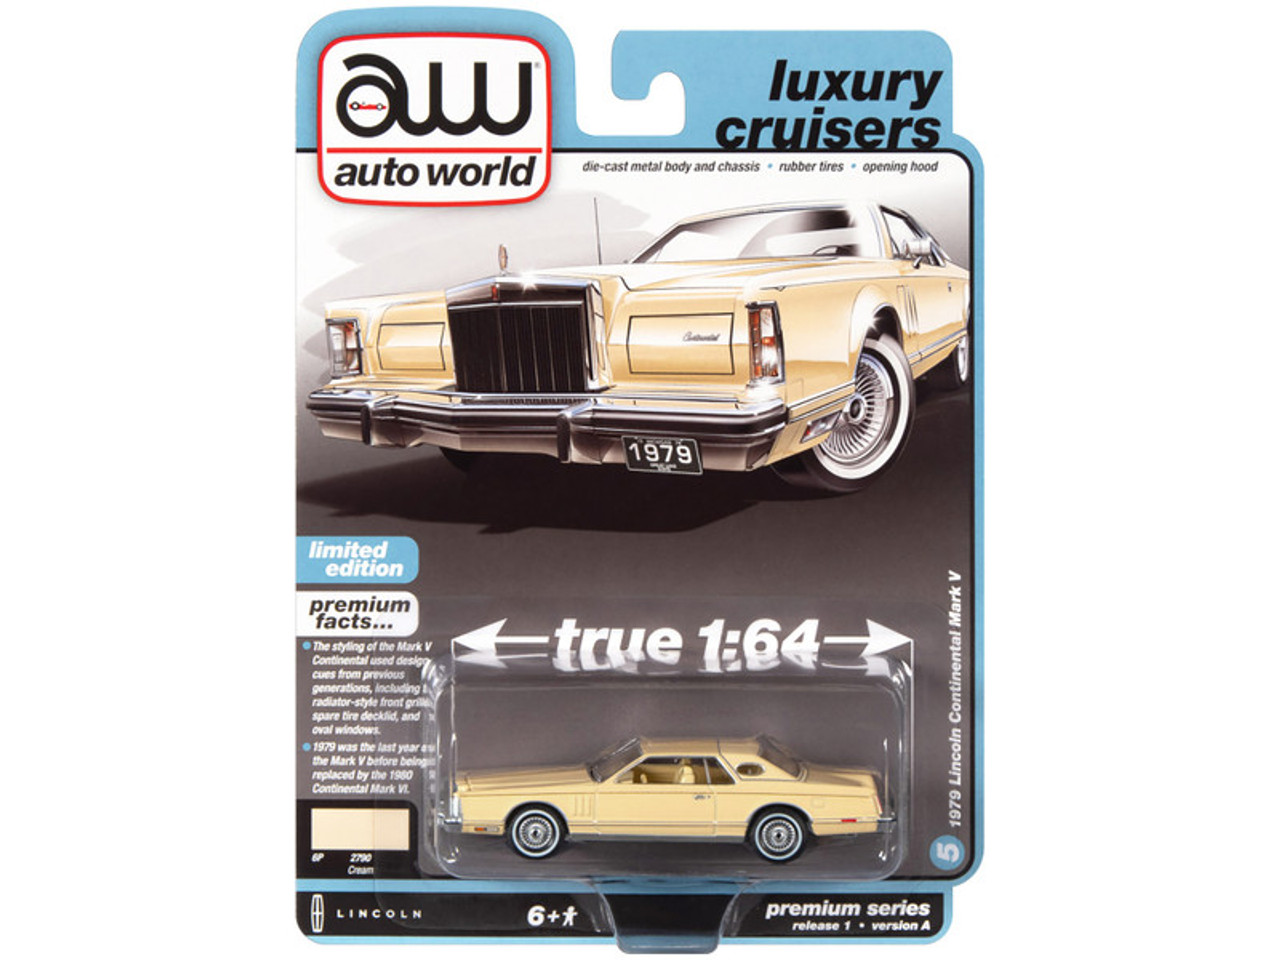 1979 Lincoln Continental Mark V Cream with Cream Interior "Luxury Cruisers" Limited Edition 1/64 Diecast Model Car by Auto World